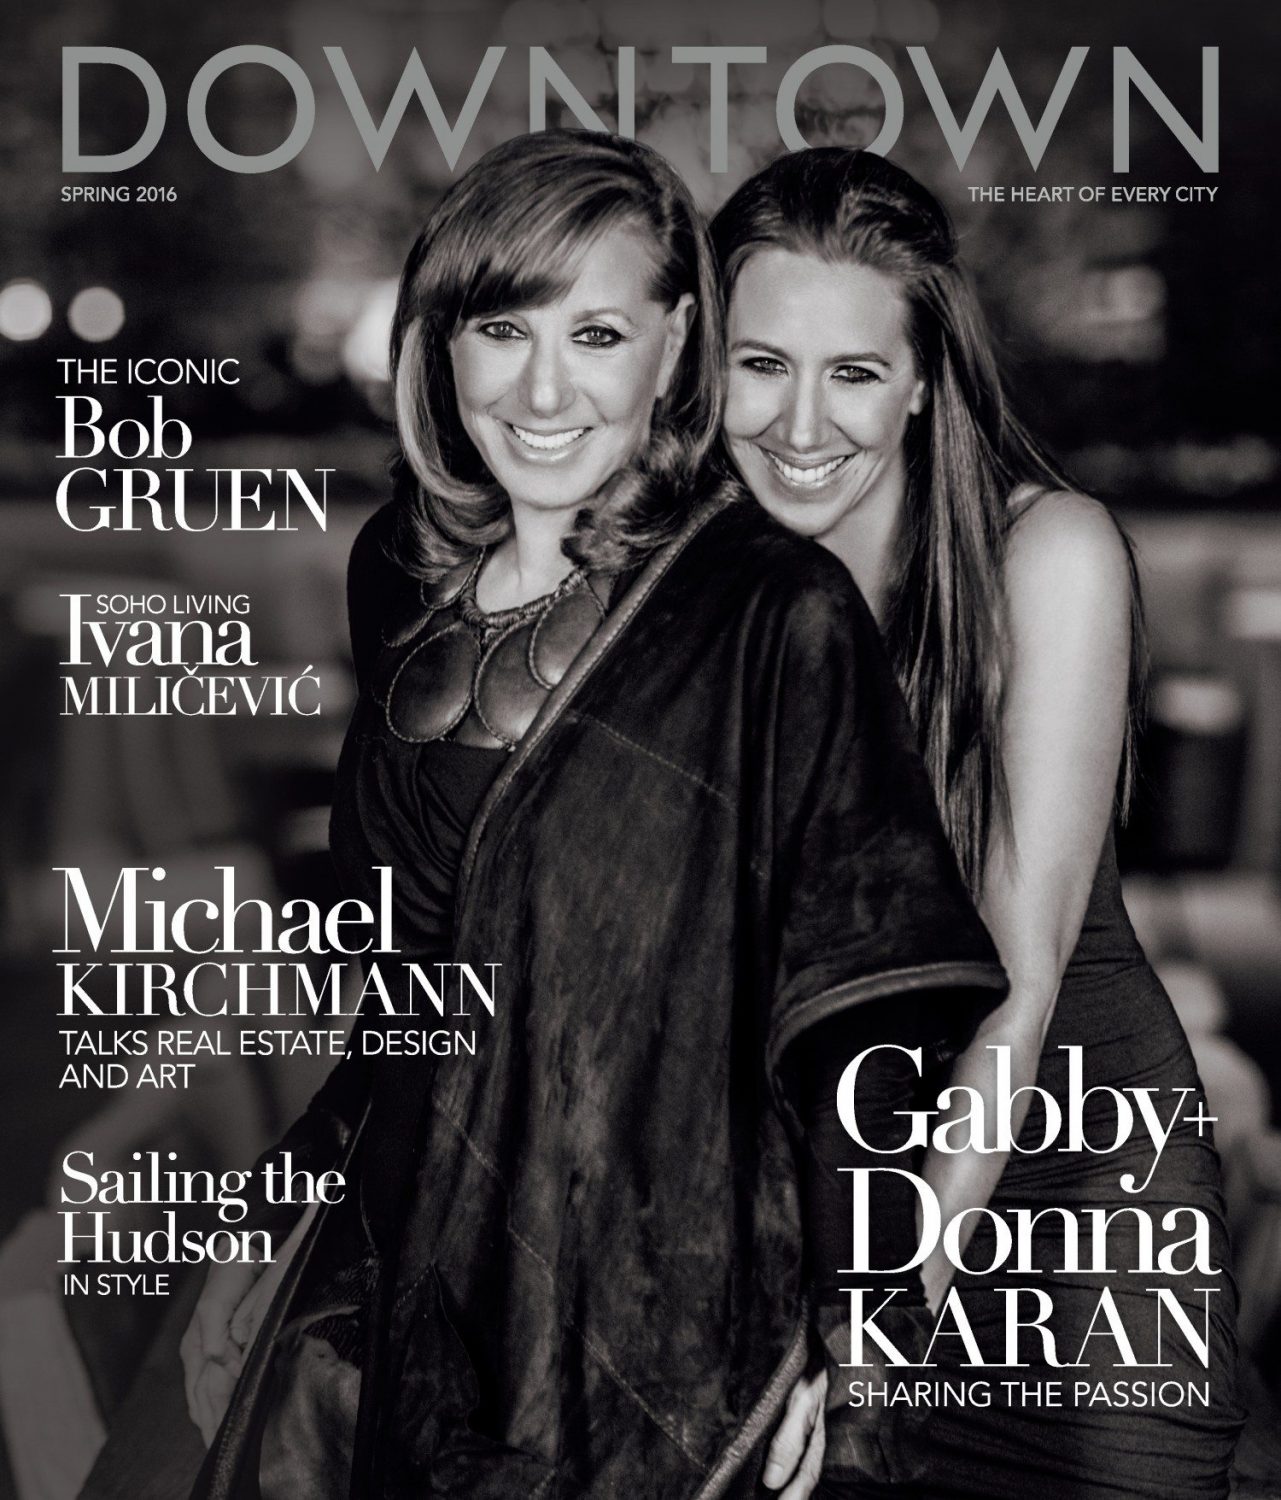 Our Shoot With Cover Stars Donna and Gabby Karan